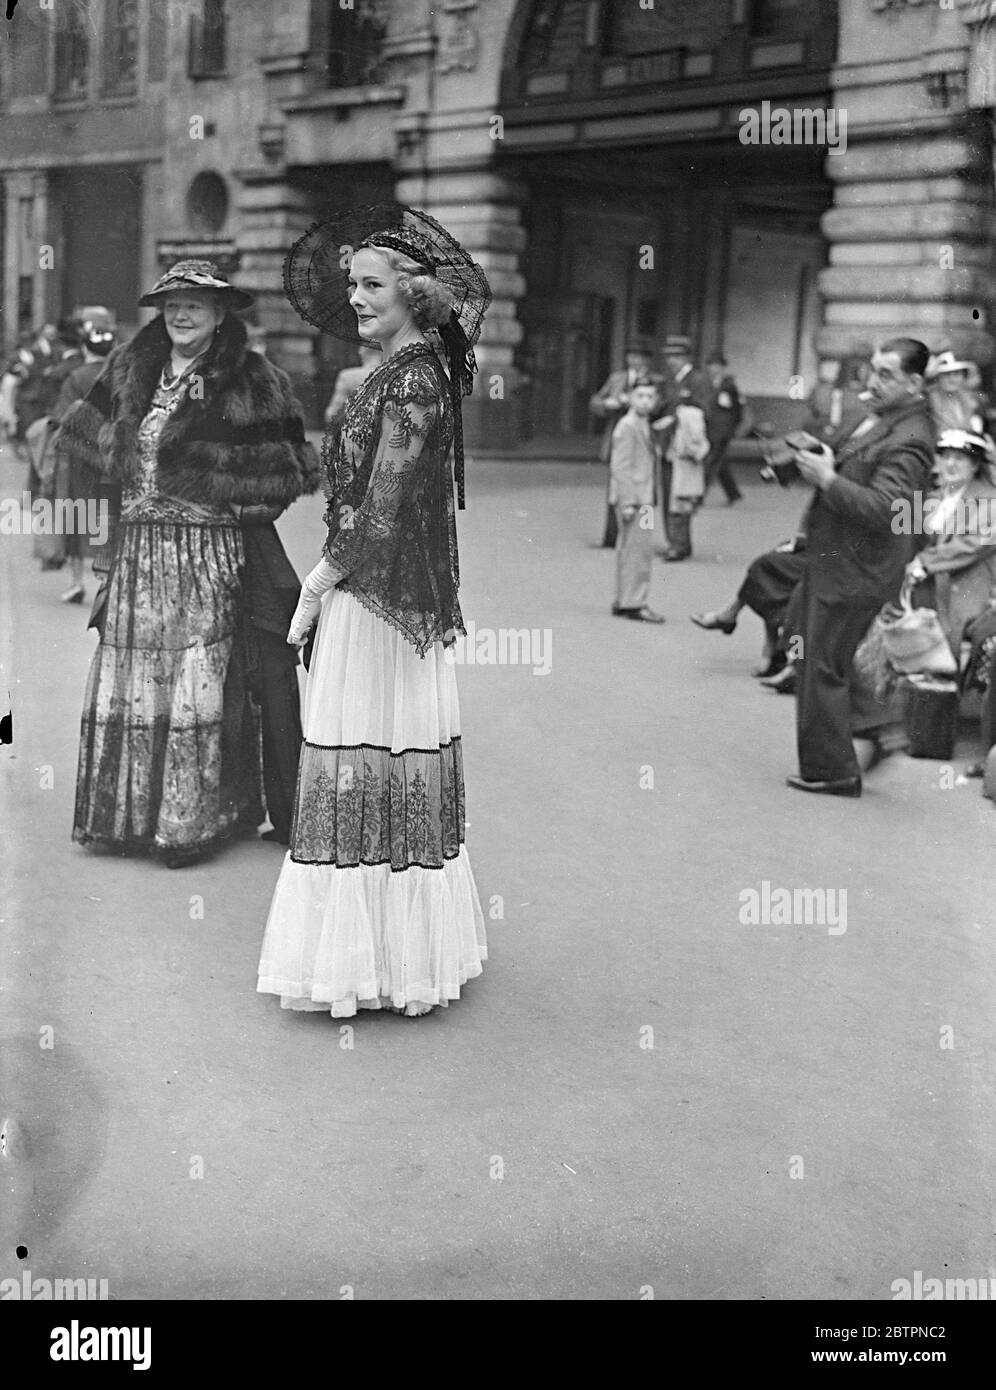 Spanish style for Ascot. Photo shows: a mantilla-like headdress worn with a lace frock by a woman racegoer leaving Waterloo Station for the second day of the Ascot meeting. 16 June 1937 Stock Photo